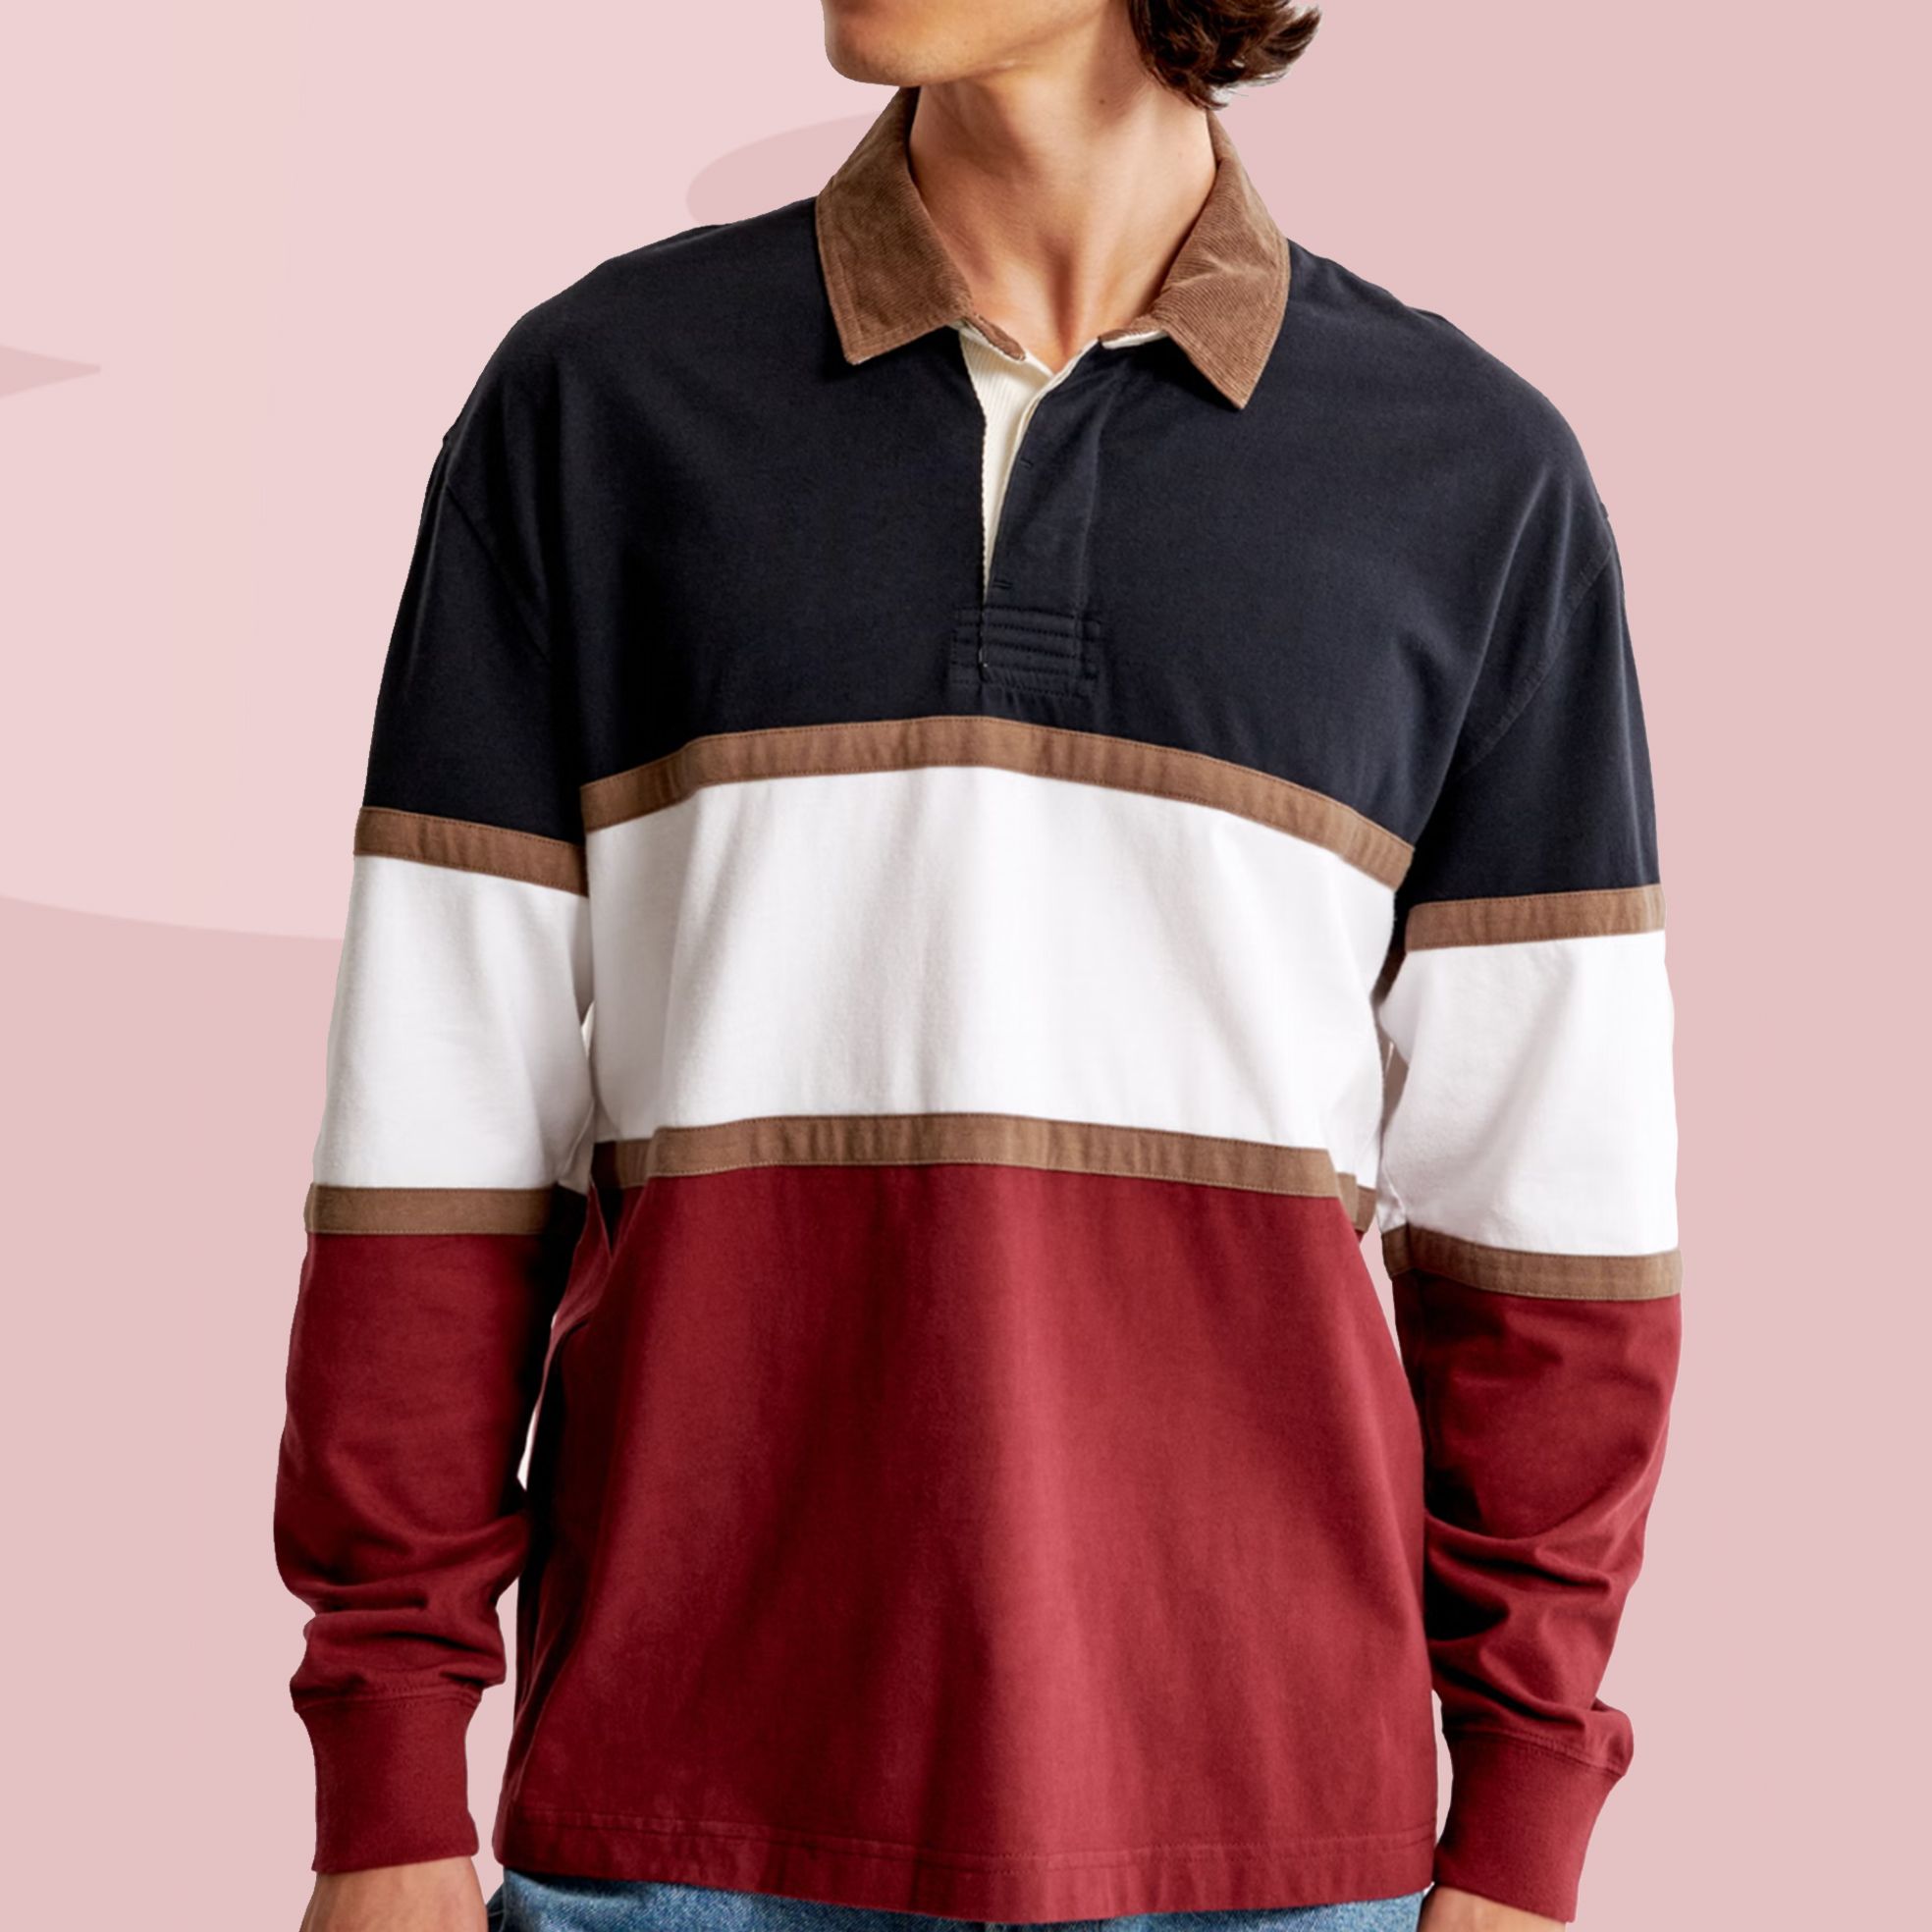 These 21 Rugby Shirts Are the Perfect Rugged Pullovers Your Wardrobe Is Missing